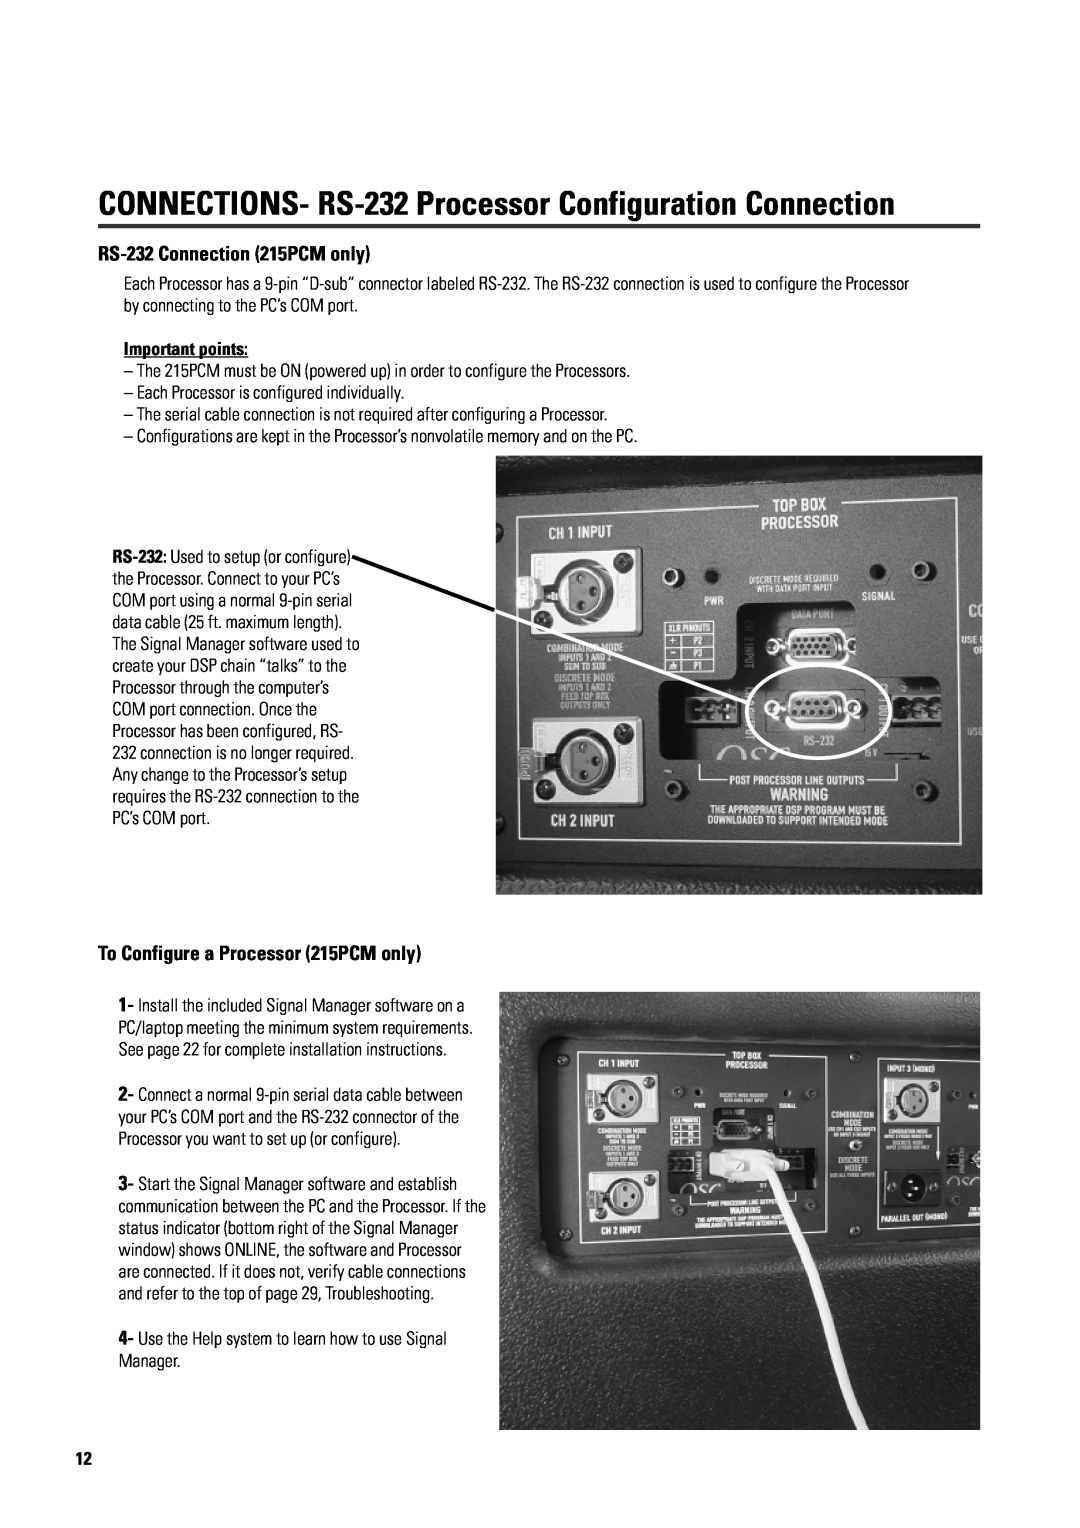 QSC Audio ISIS 215PCM user manual RS-232Connection 215PCM only, To Configure a Processor 215PCM only, Important points 